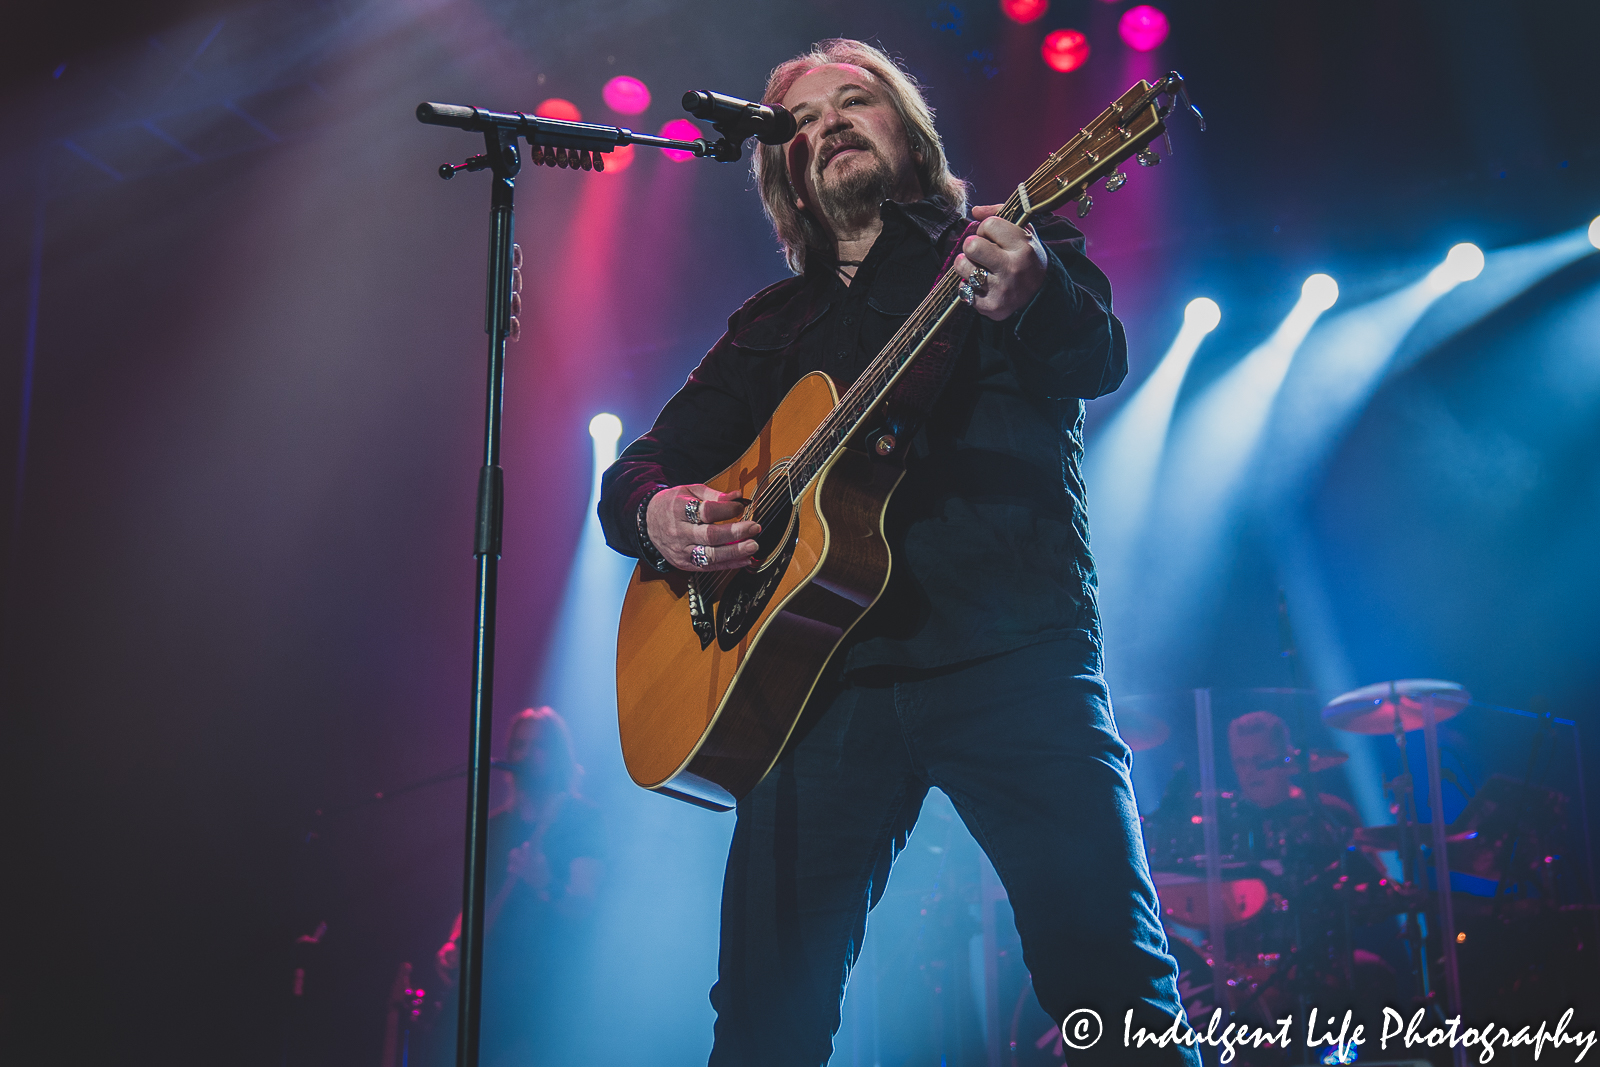 Travis Tritt playing the acoustic guitar during his live concert at Ameristar Casino's Star Pavilion in Kansas City, MO on December 3, 2021.